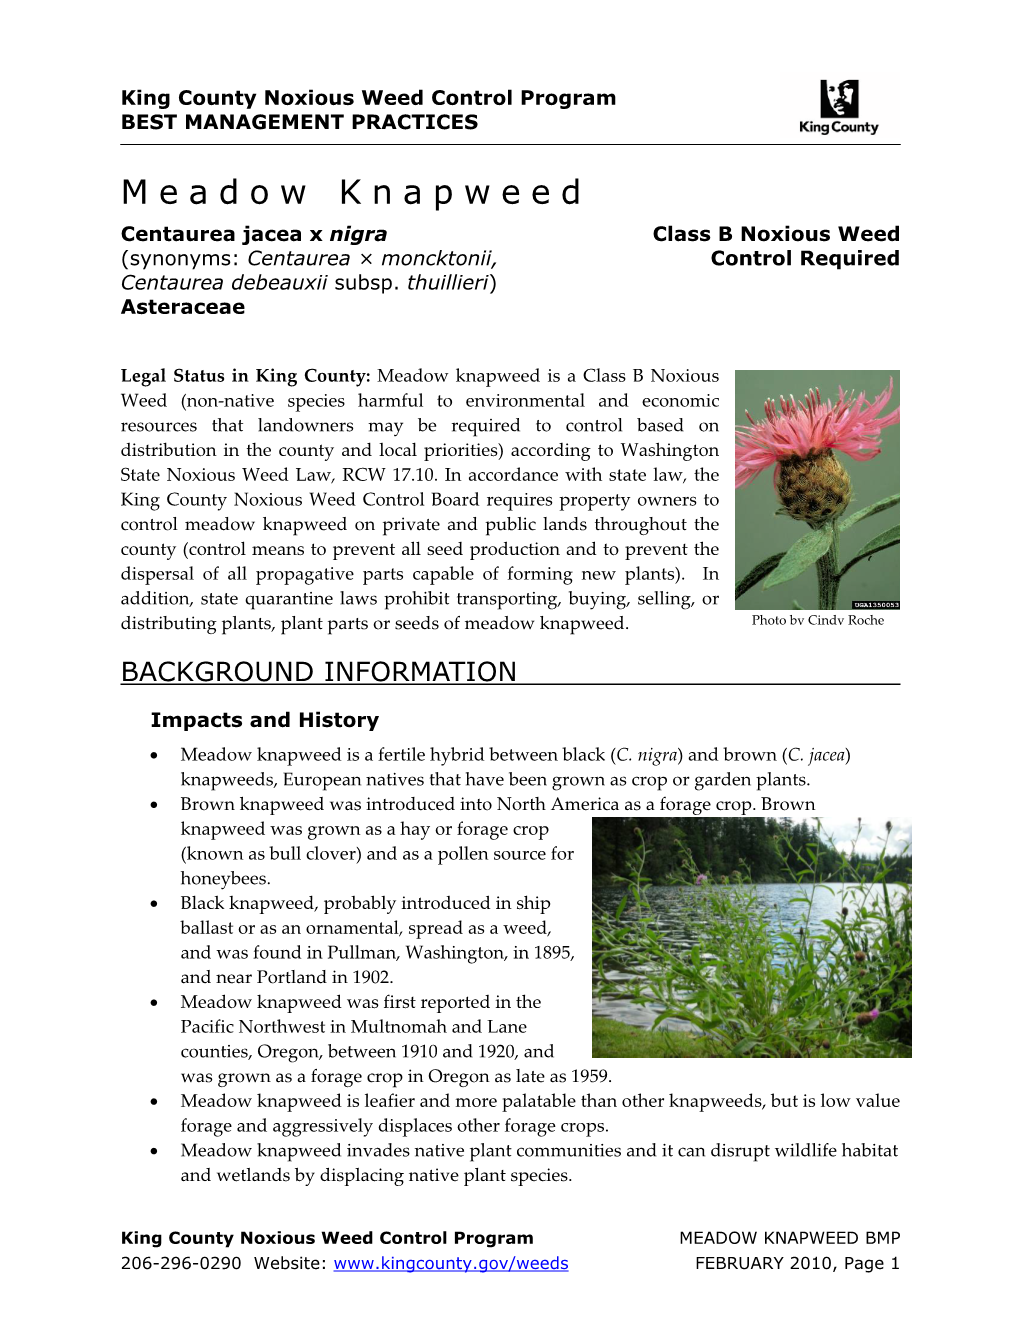 King County Best Management Practices for Meadow Knapweed